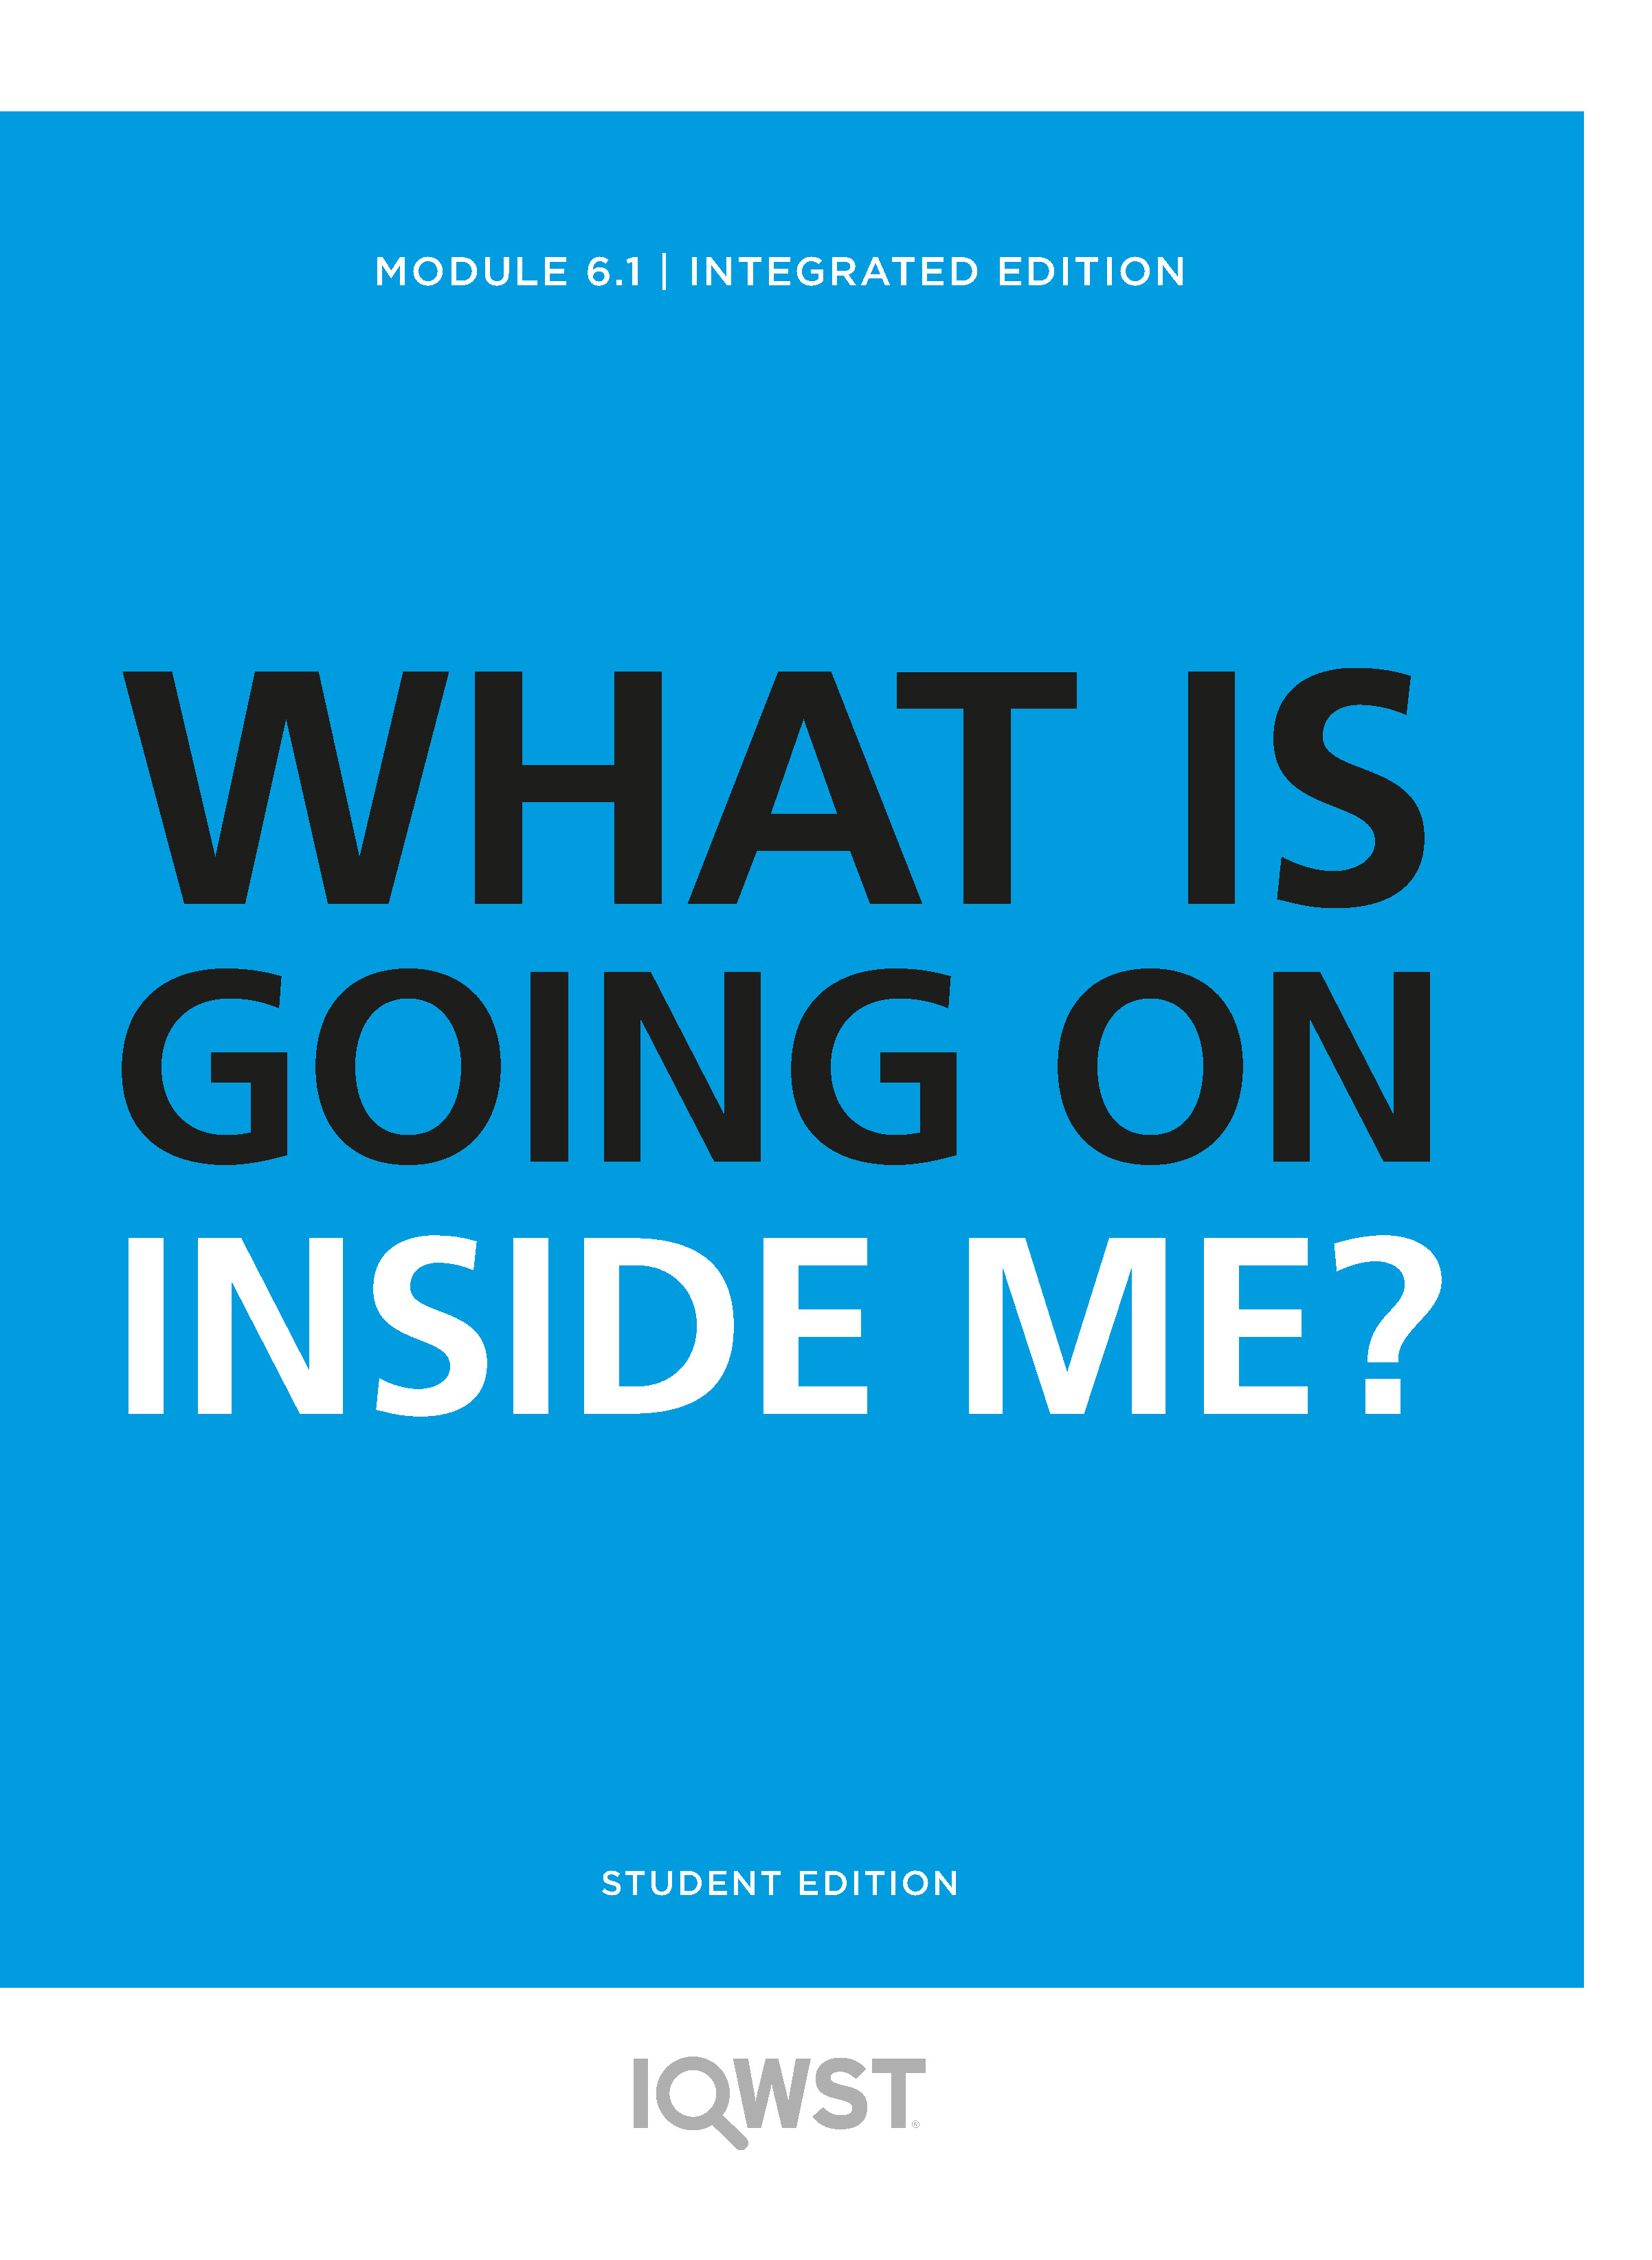 6.1 What Is Going On Inside Me?